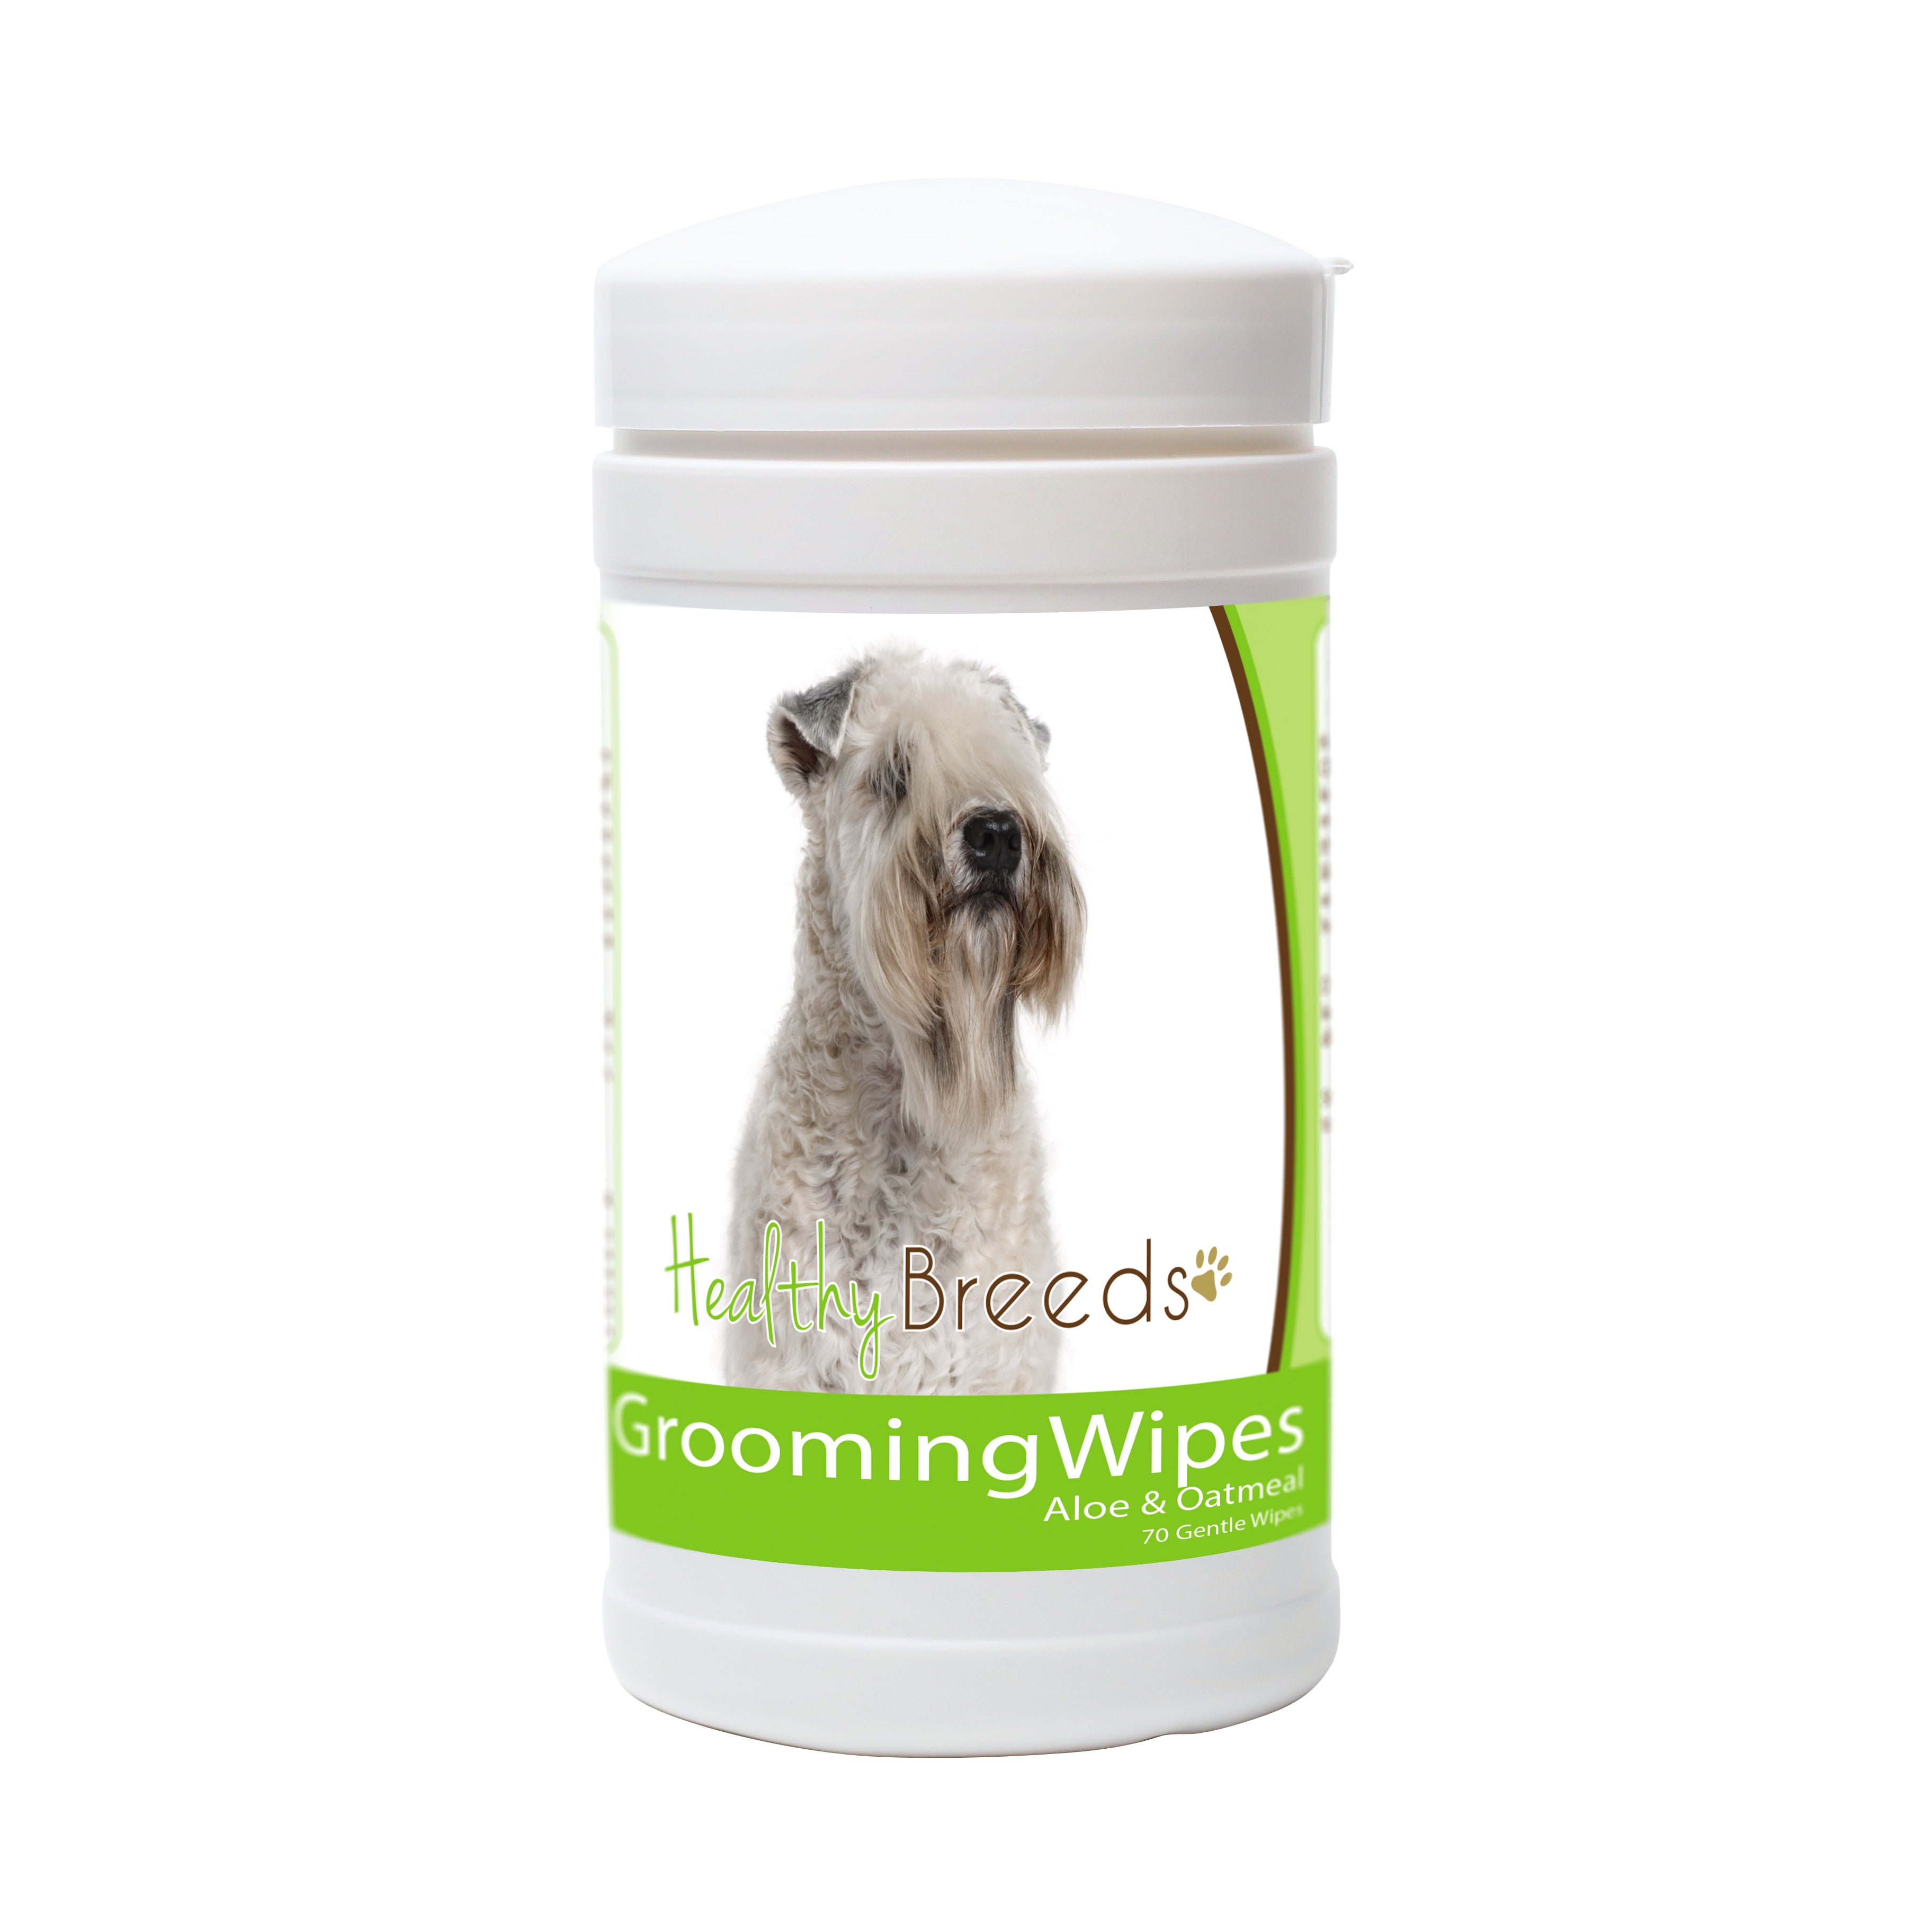 Soft Coated Wheaten Terrier Grooming Wipes 70 Count